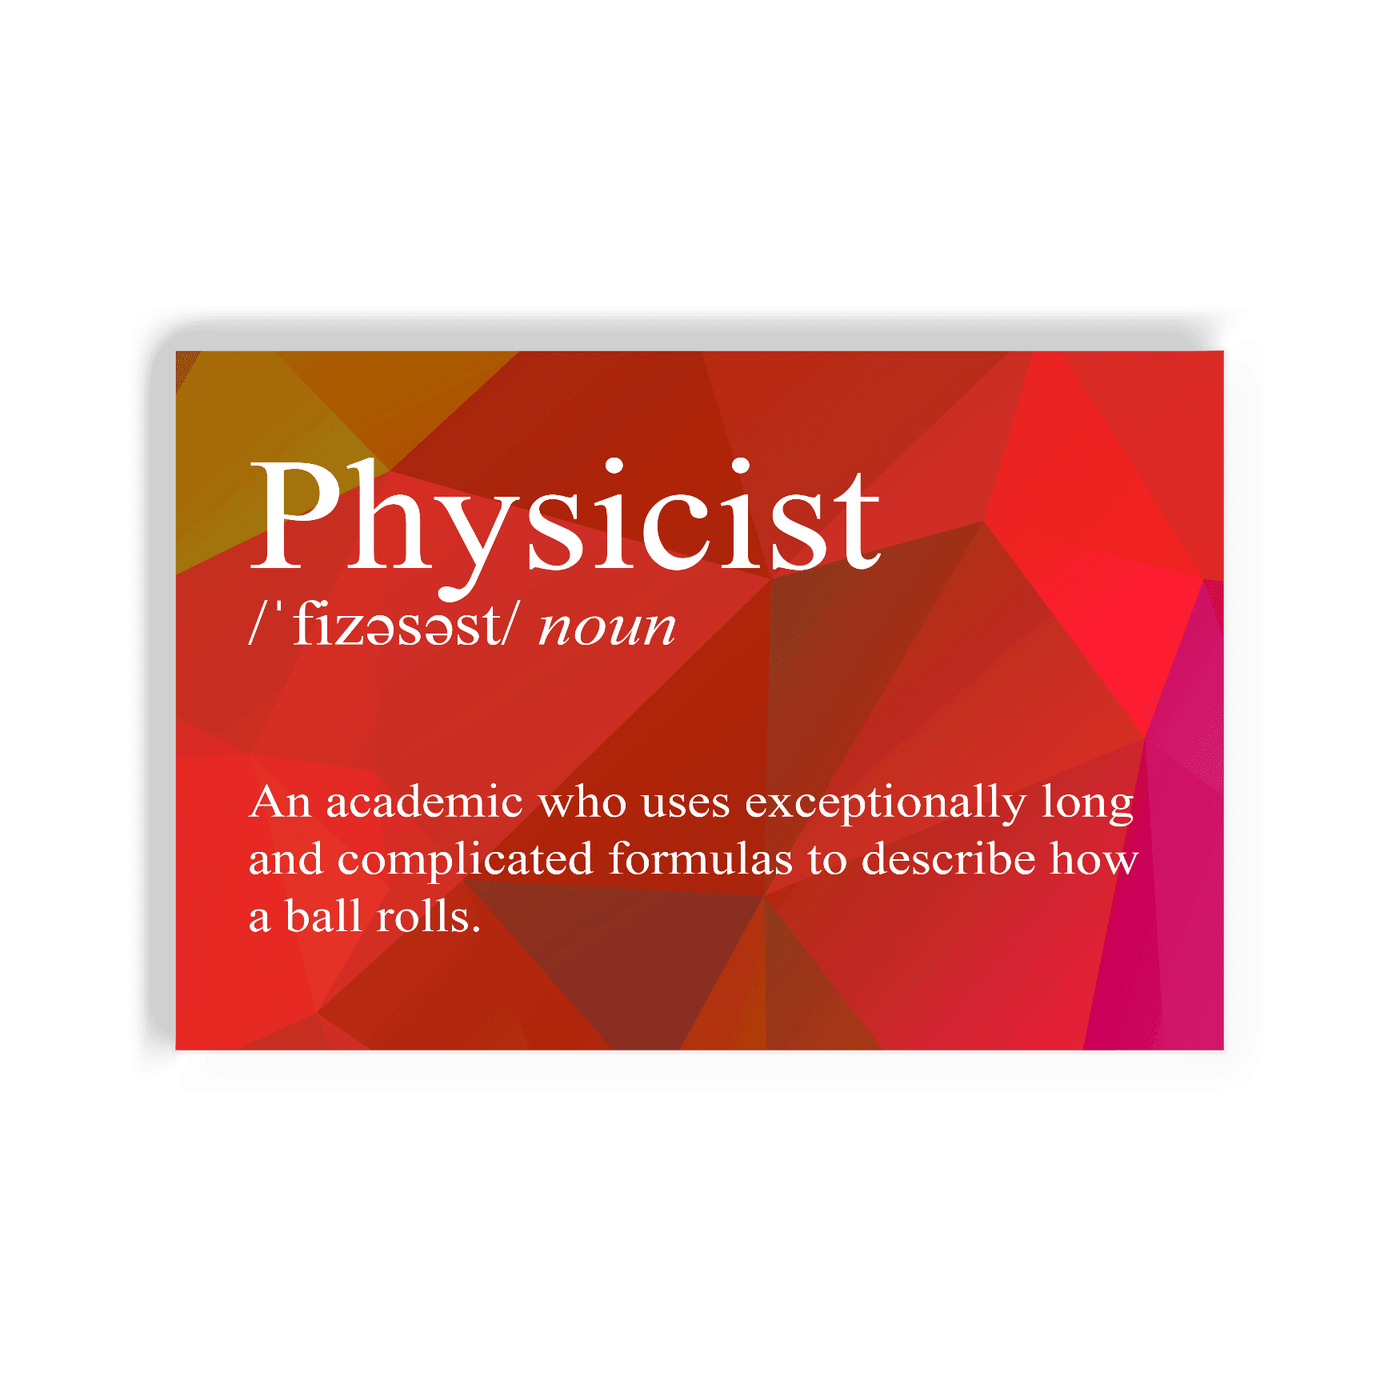 2x3 colorful magnet with image of triangles and a snarky definition for a physicist